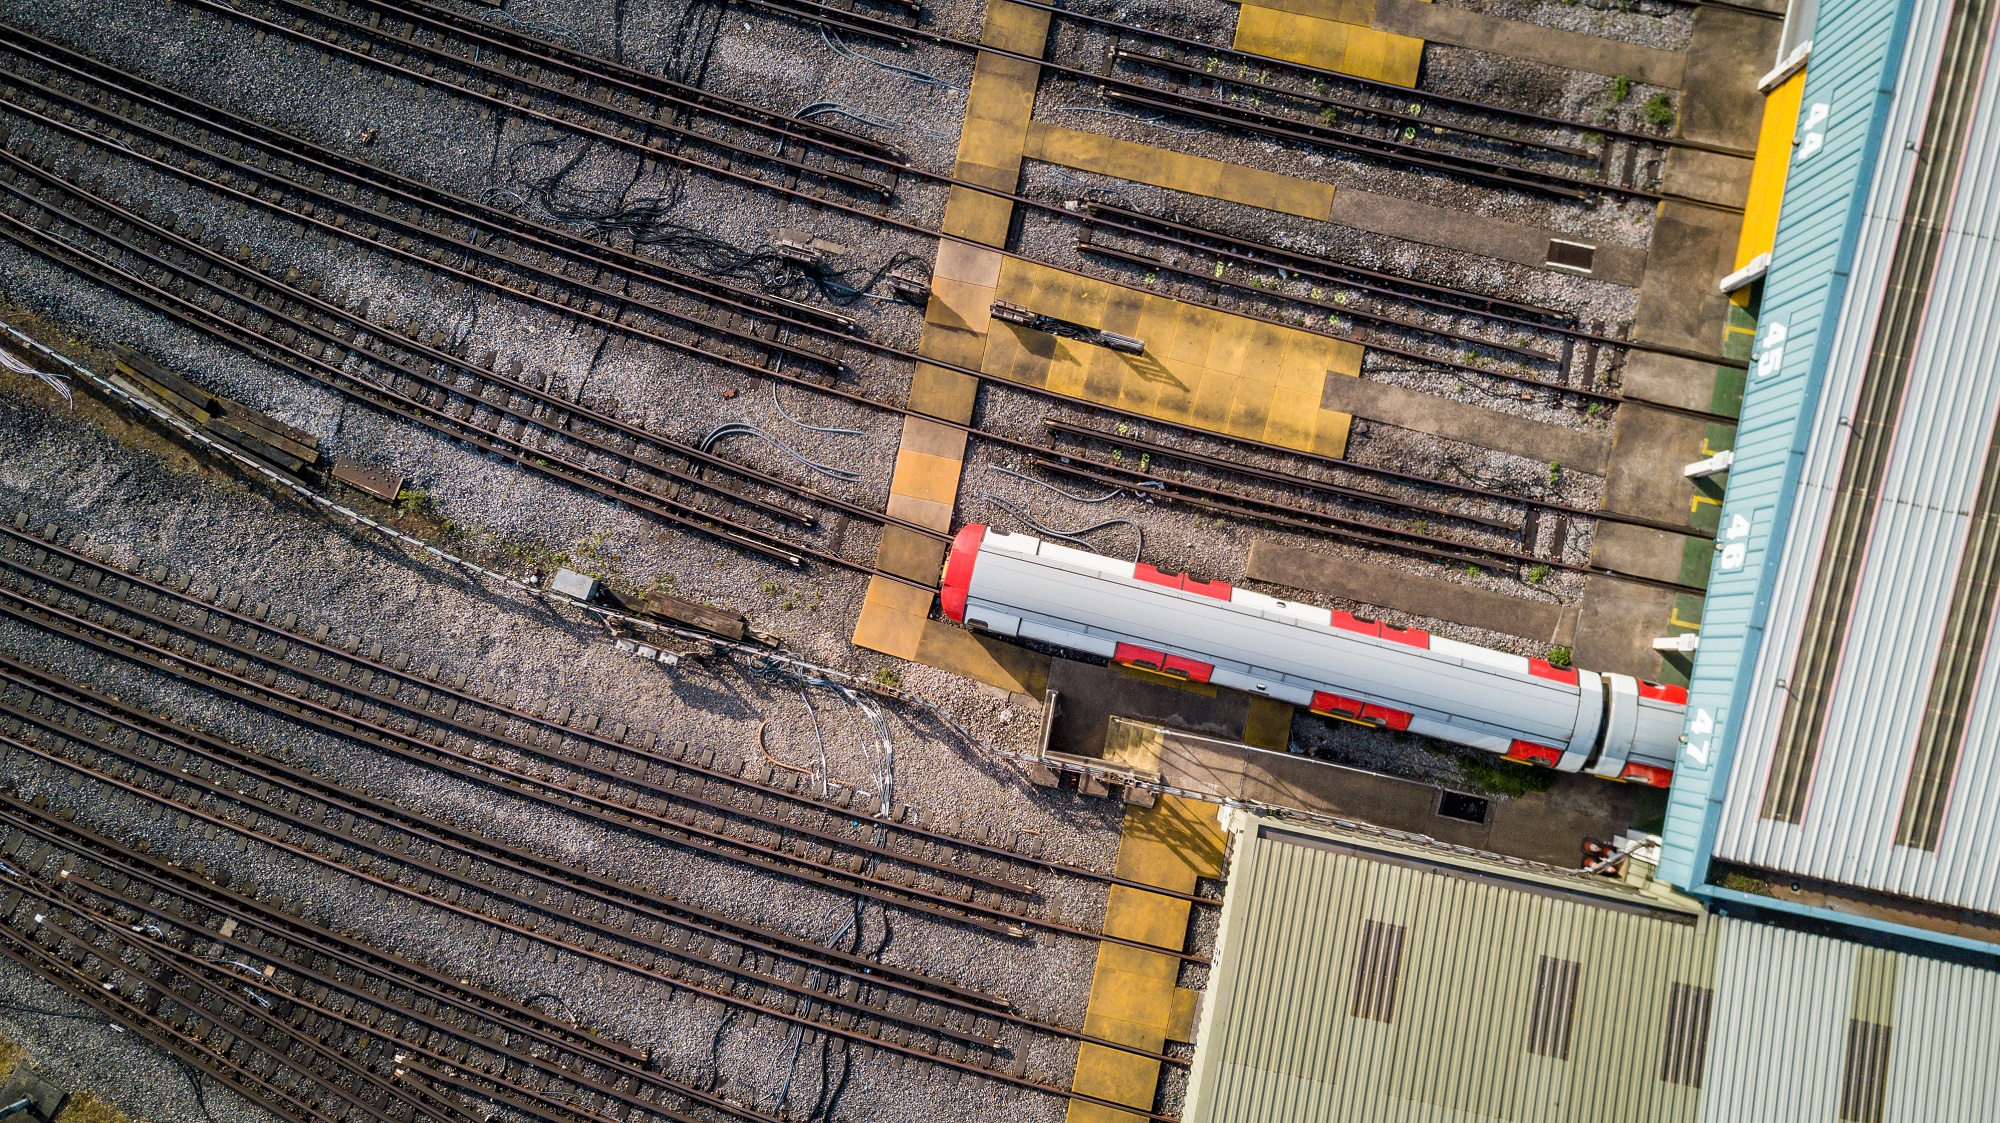 Slide 77 of 100: London Underground tube train depot. Aerial drone photo looking down onto a London tube train emerging from a garage at a North London tube train depot.